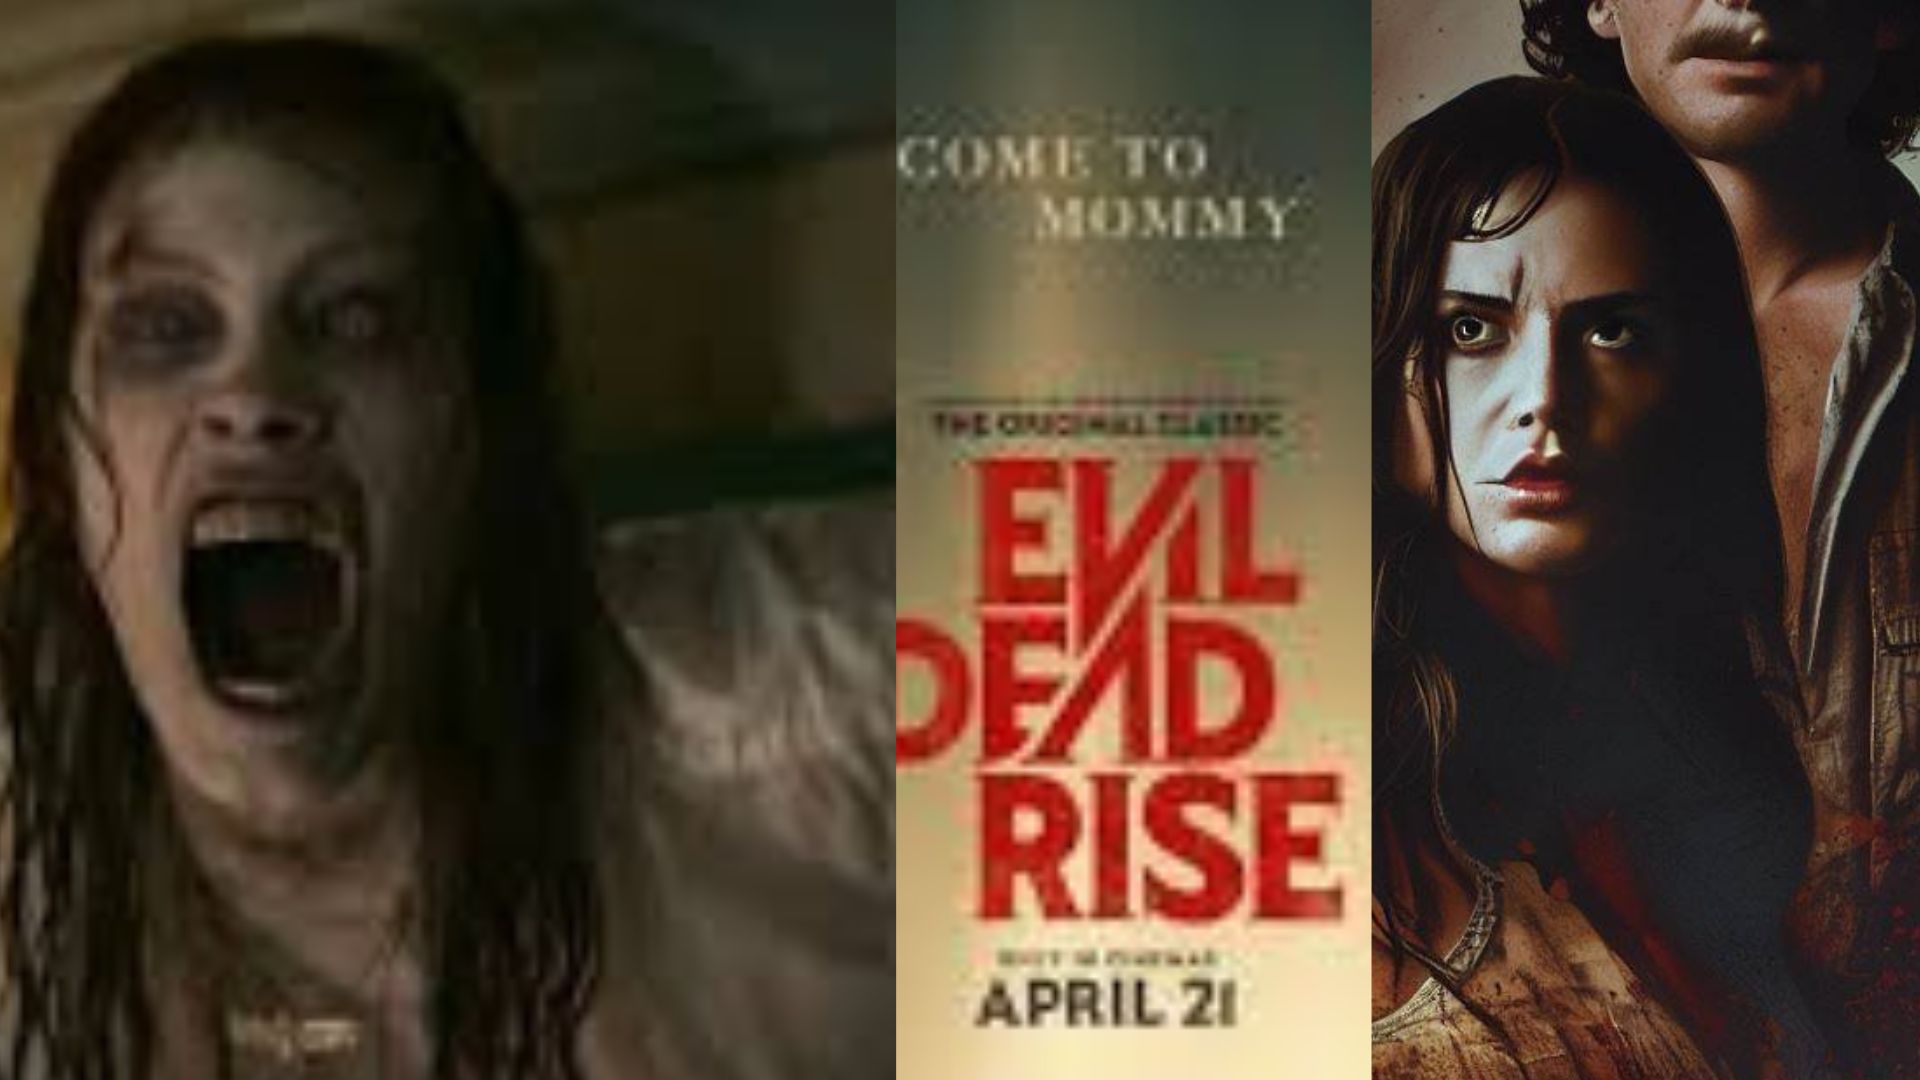 Evil Dead Rise: The Movie That Will Make You Wish You Stayed Home